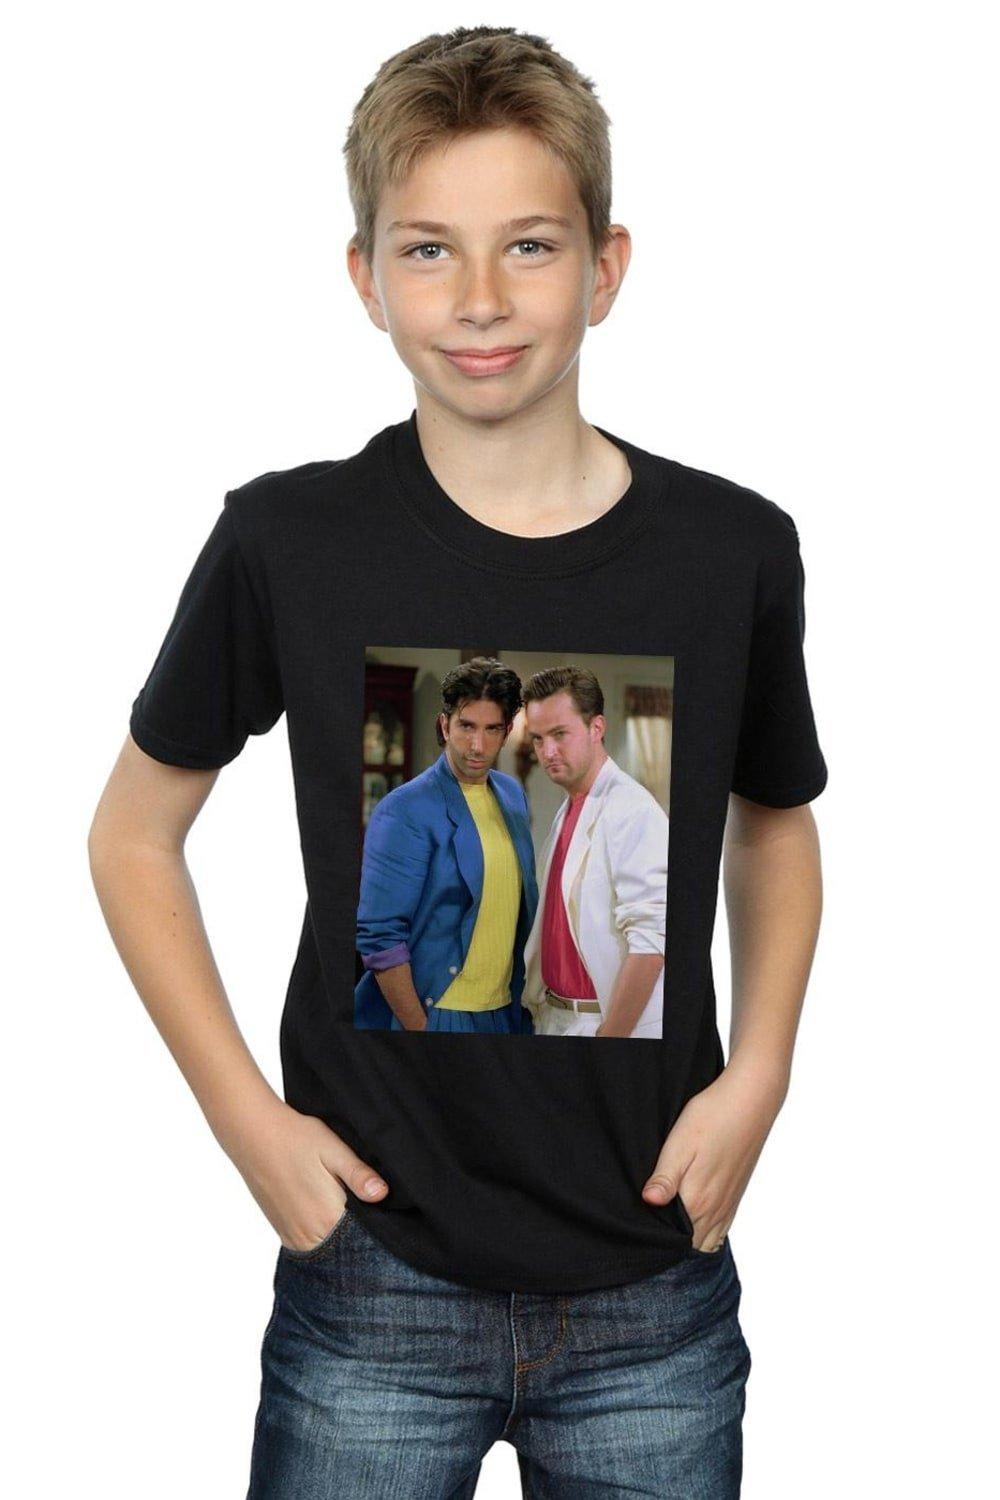 80’s Ross And Chandler T-Shirt